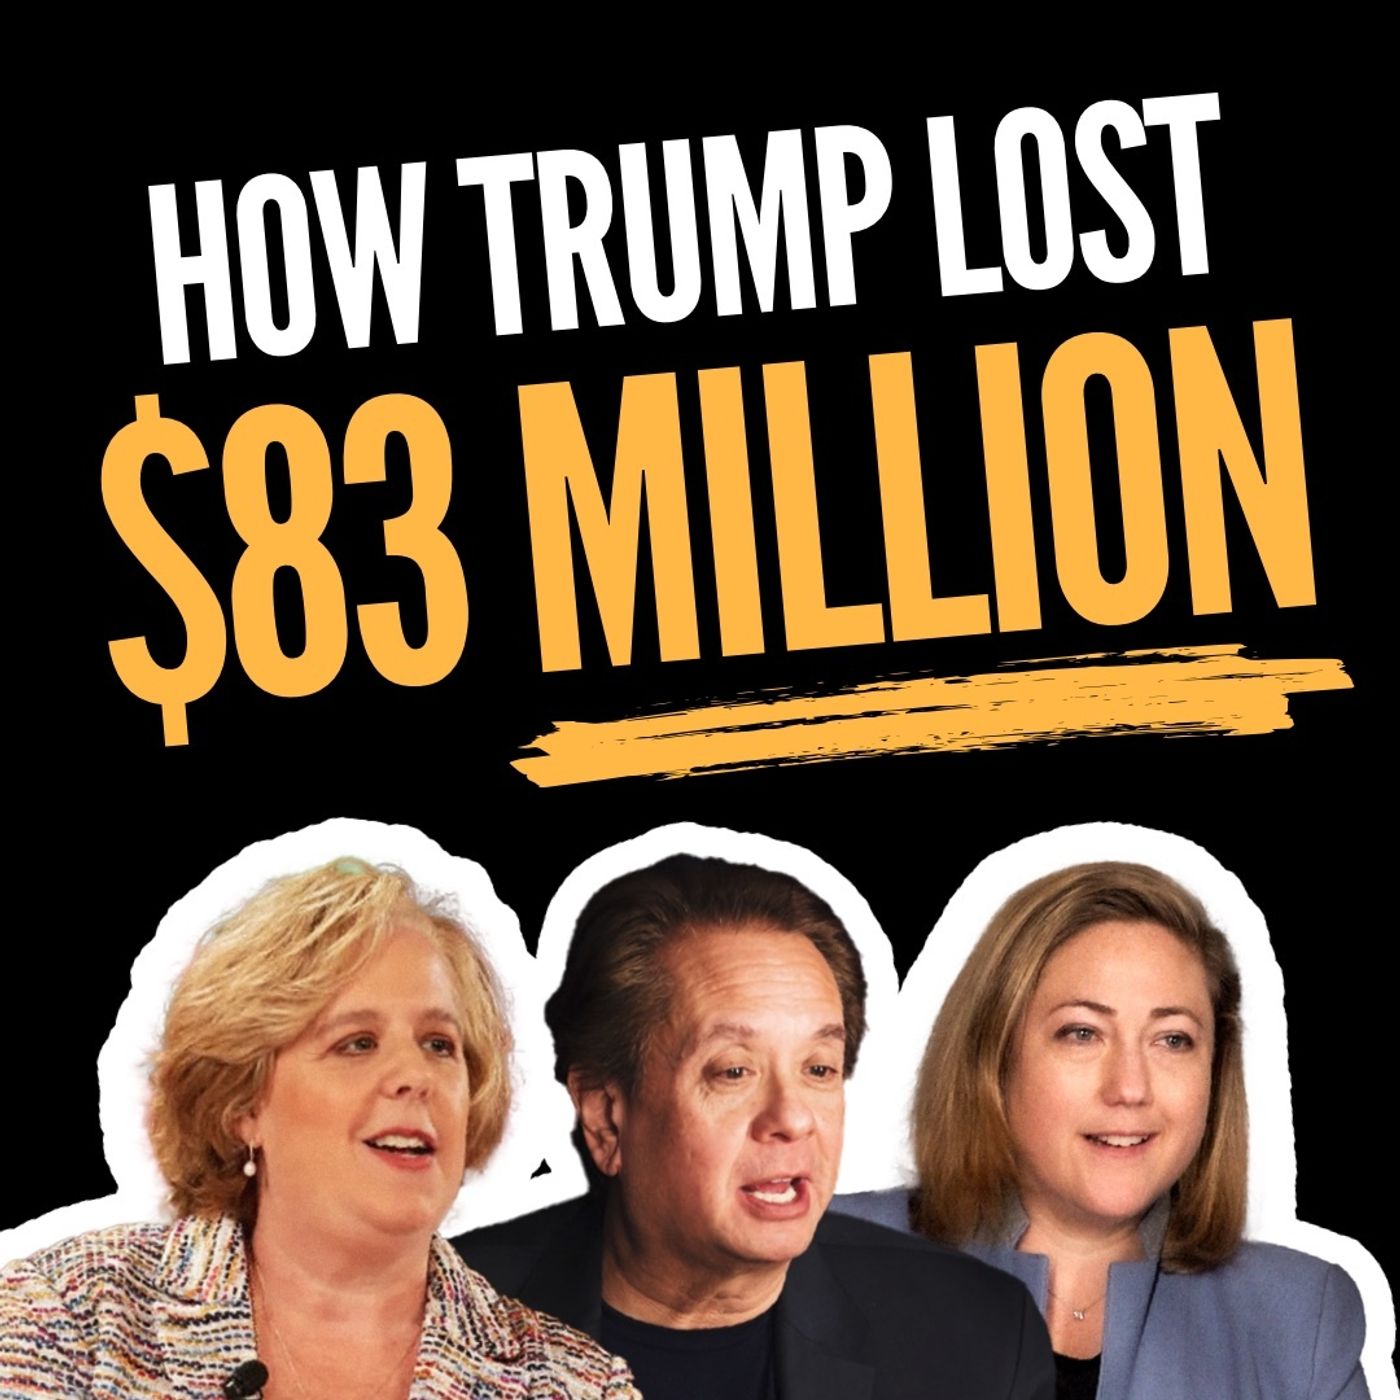 George Conway Explains: How Trump Lost $83M (with Roberta Kaplan!)